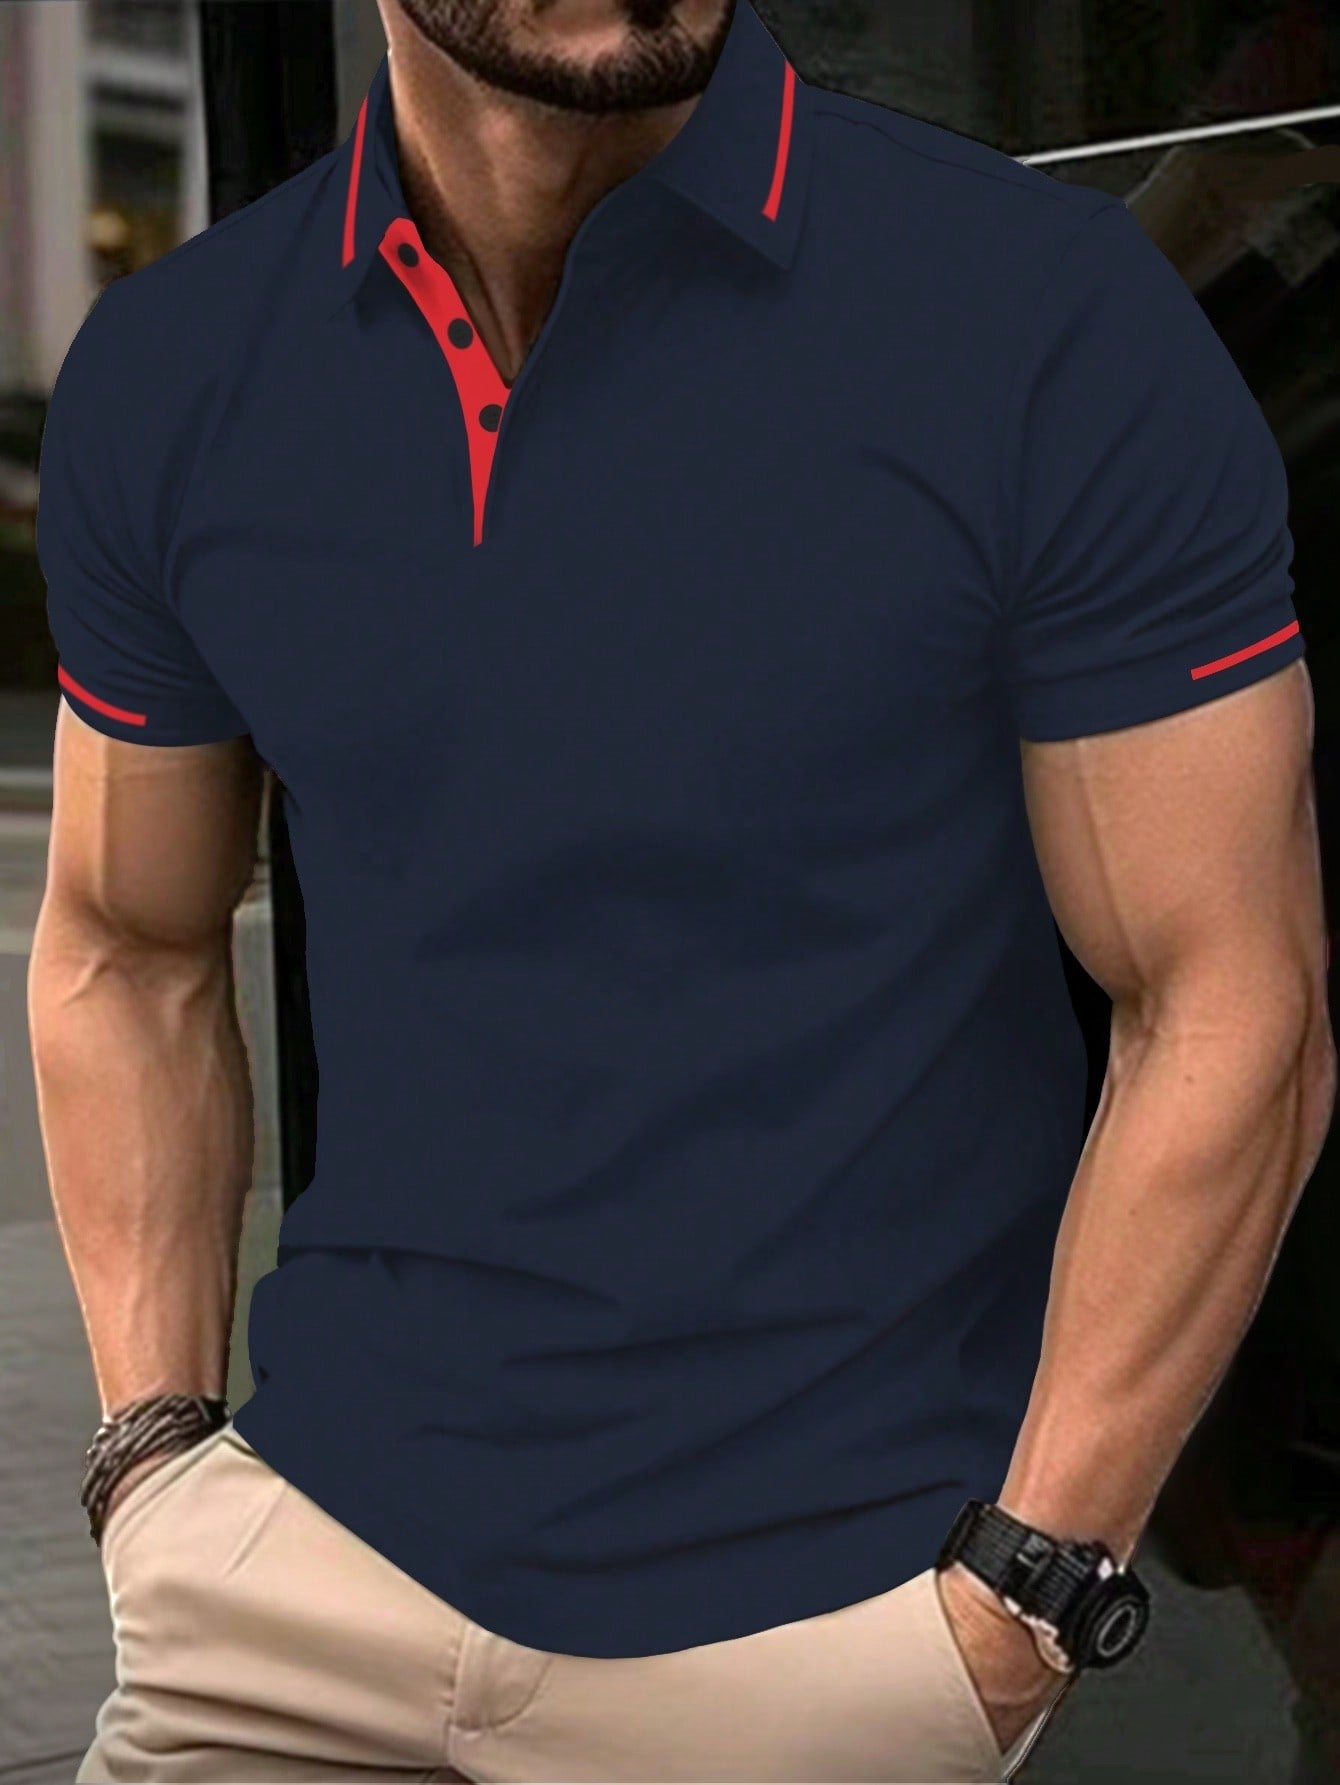 Color Block Polo Shirt for Men - Pink Casual Style